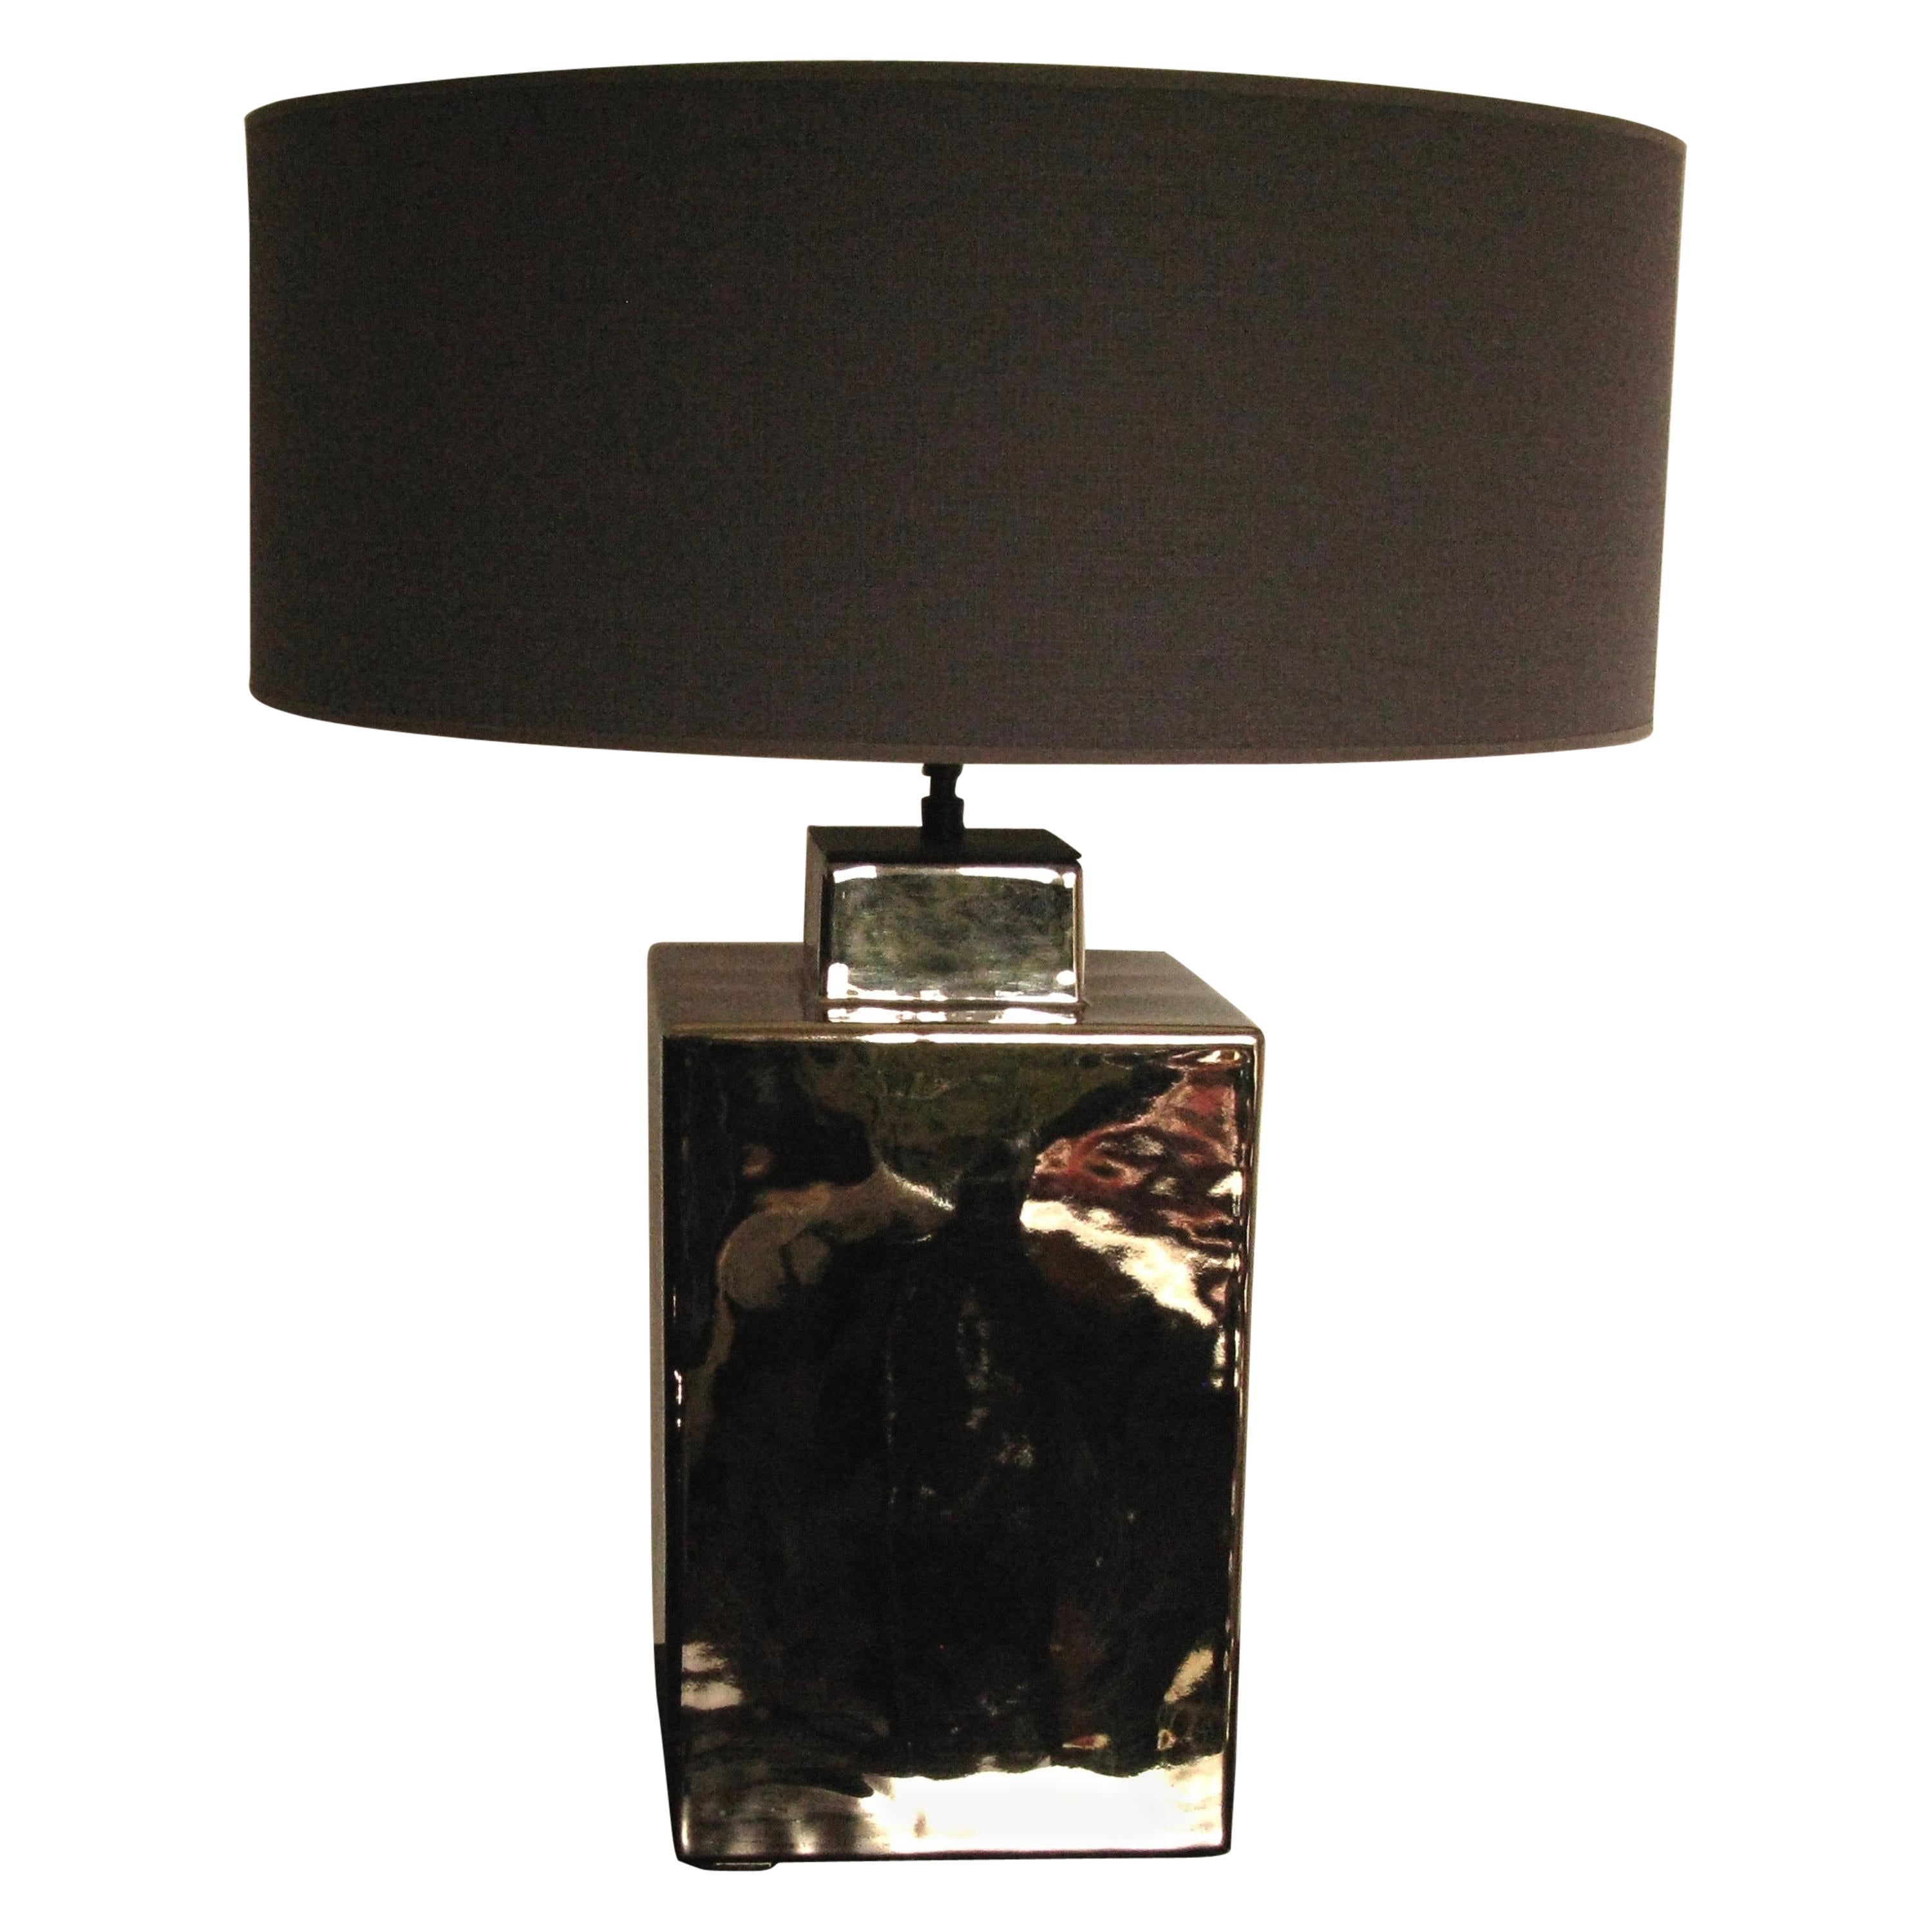 3M Design Silver Lamp with Lampshade, Modern, 21st Century, table lamp, sofa lamp